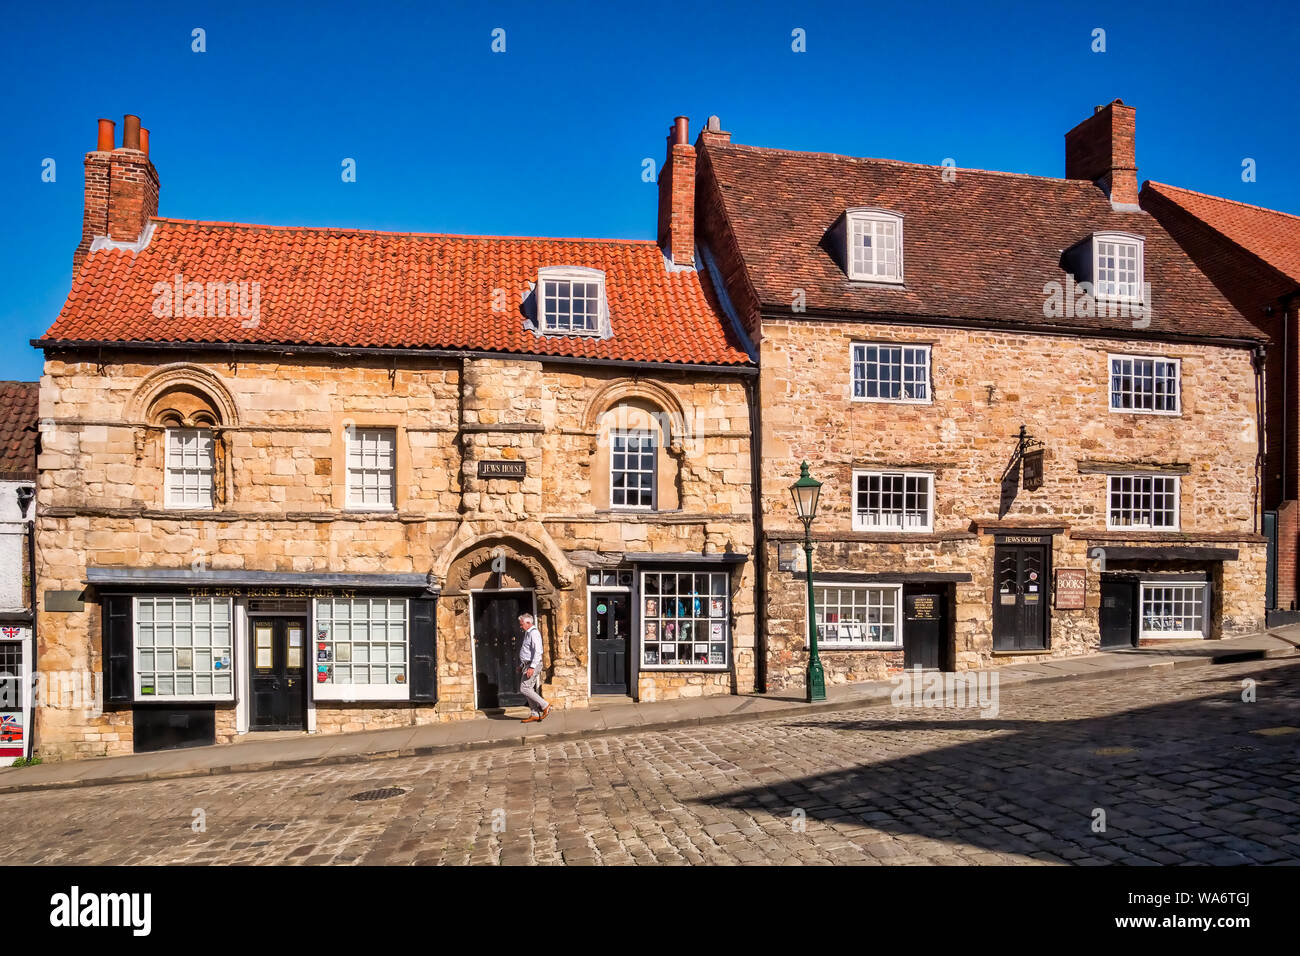 2 July 2019: Lincoln, Lincolnshire, UK - Jew's House and Jews' Court on Steep Hill, Lincoln. These buildings contain stonework from the 12th century. Stock Photo